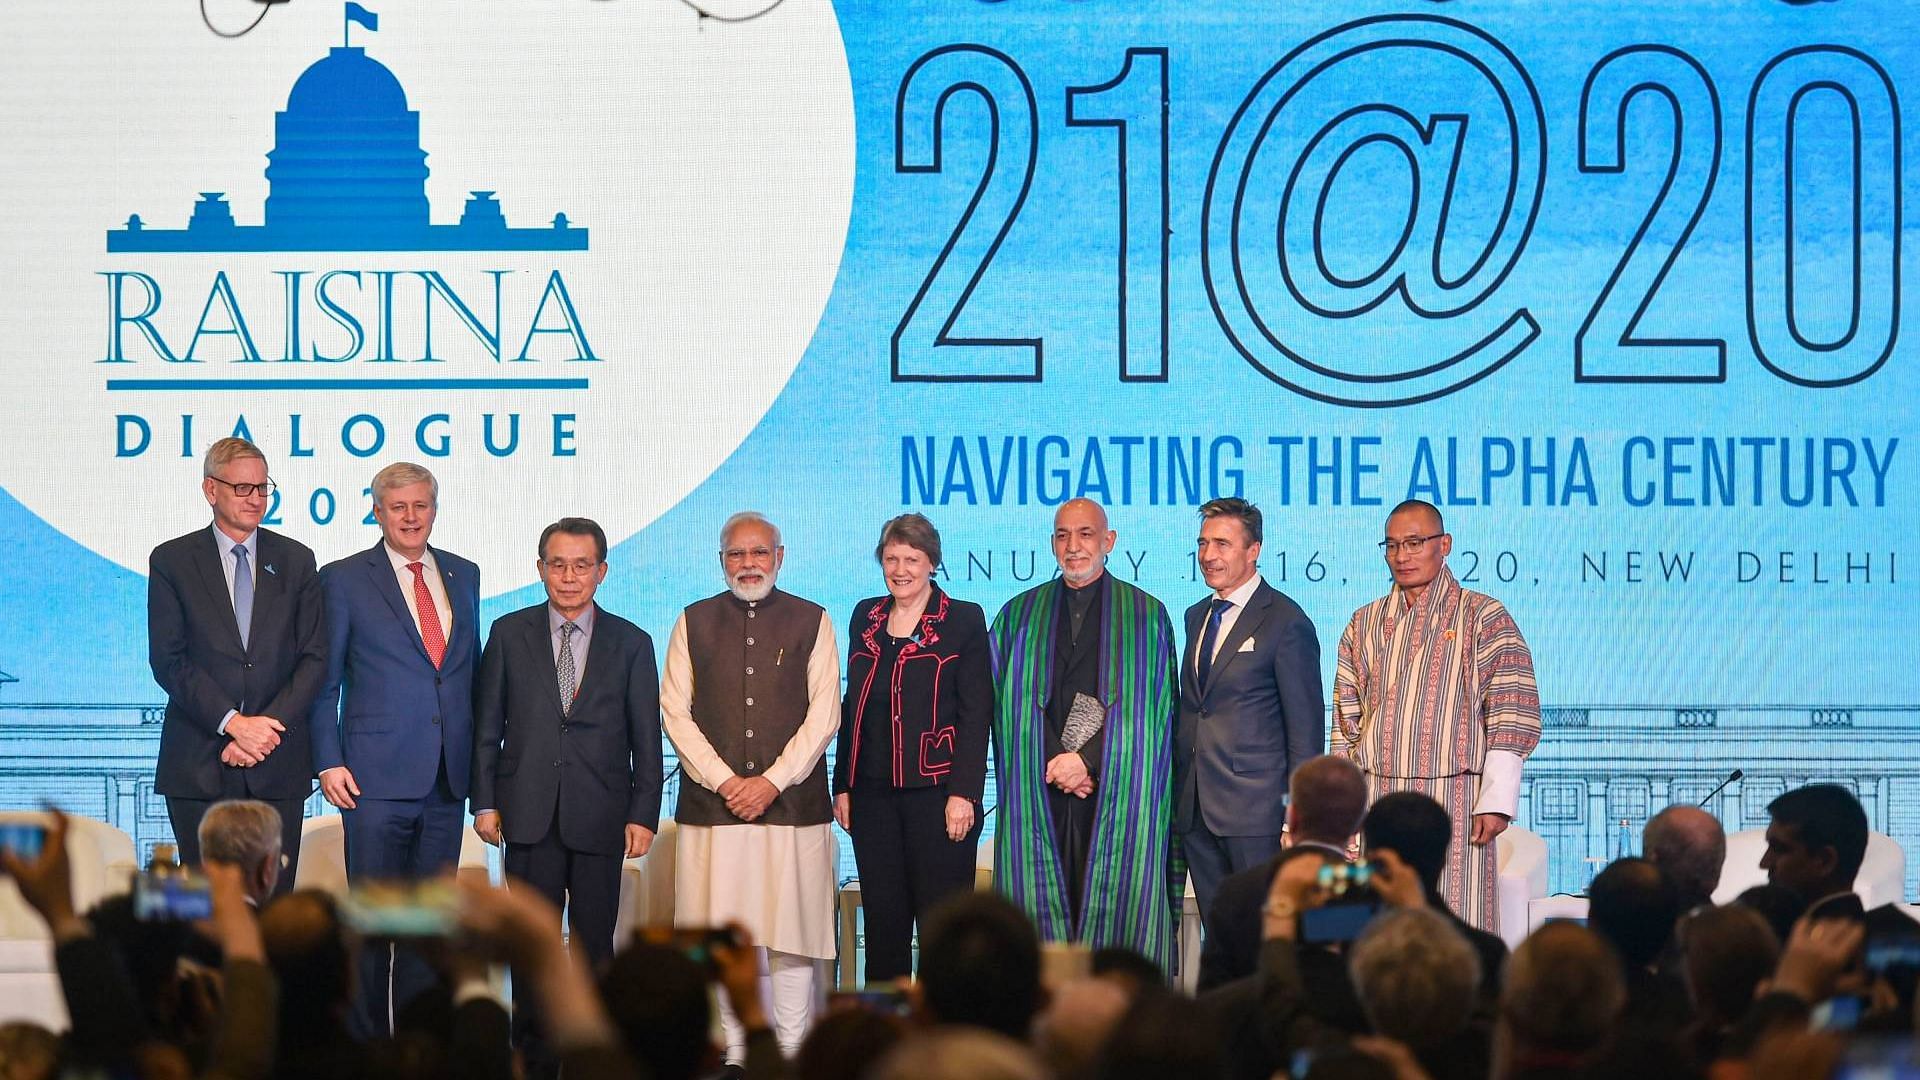 Prime Minister Narendra Modi in a group photo with the delegates during the inaugural session of Raisina Dialogue 2020, in New Delhi, on Tuesday, 14 January.